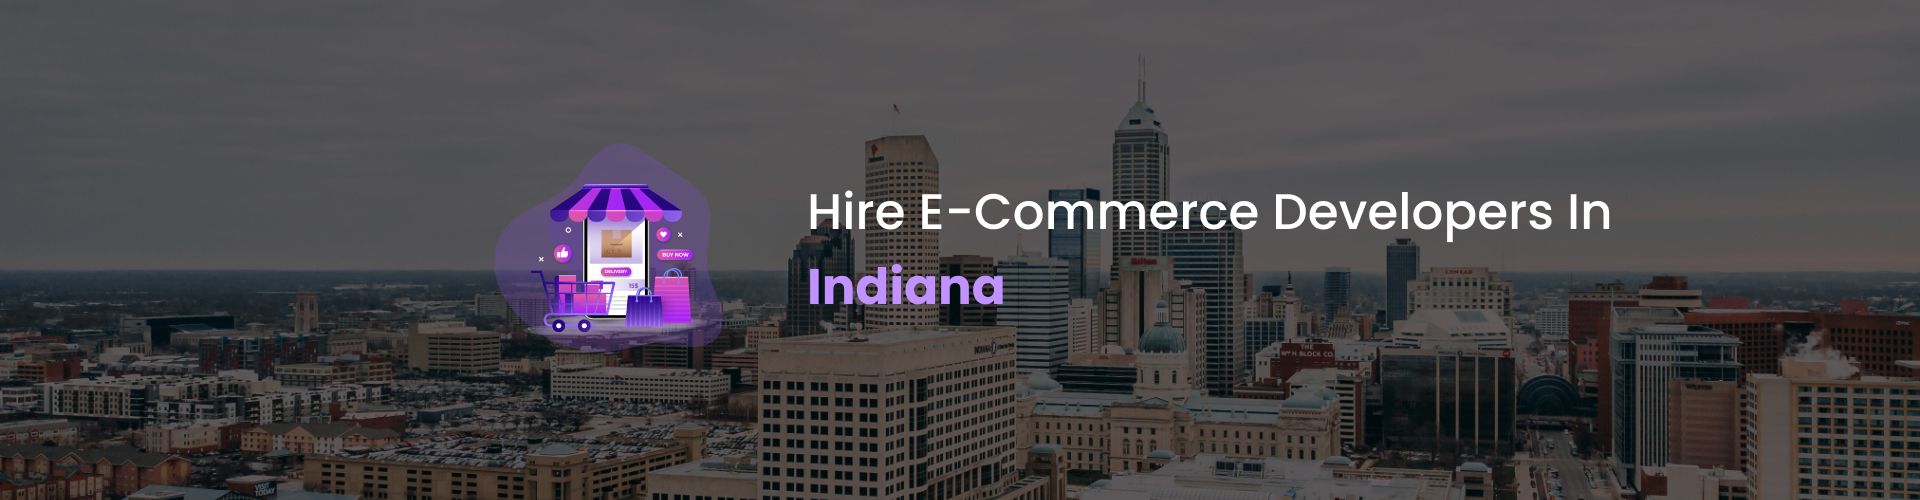 hire ecommerce developers in indiana